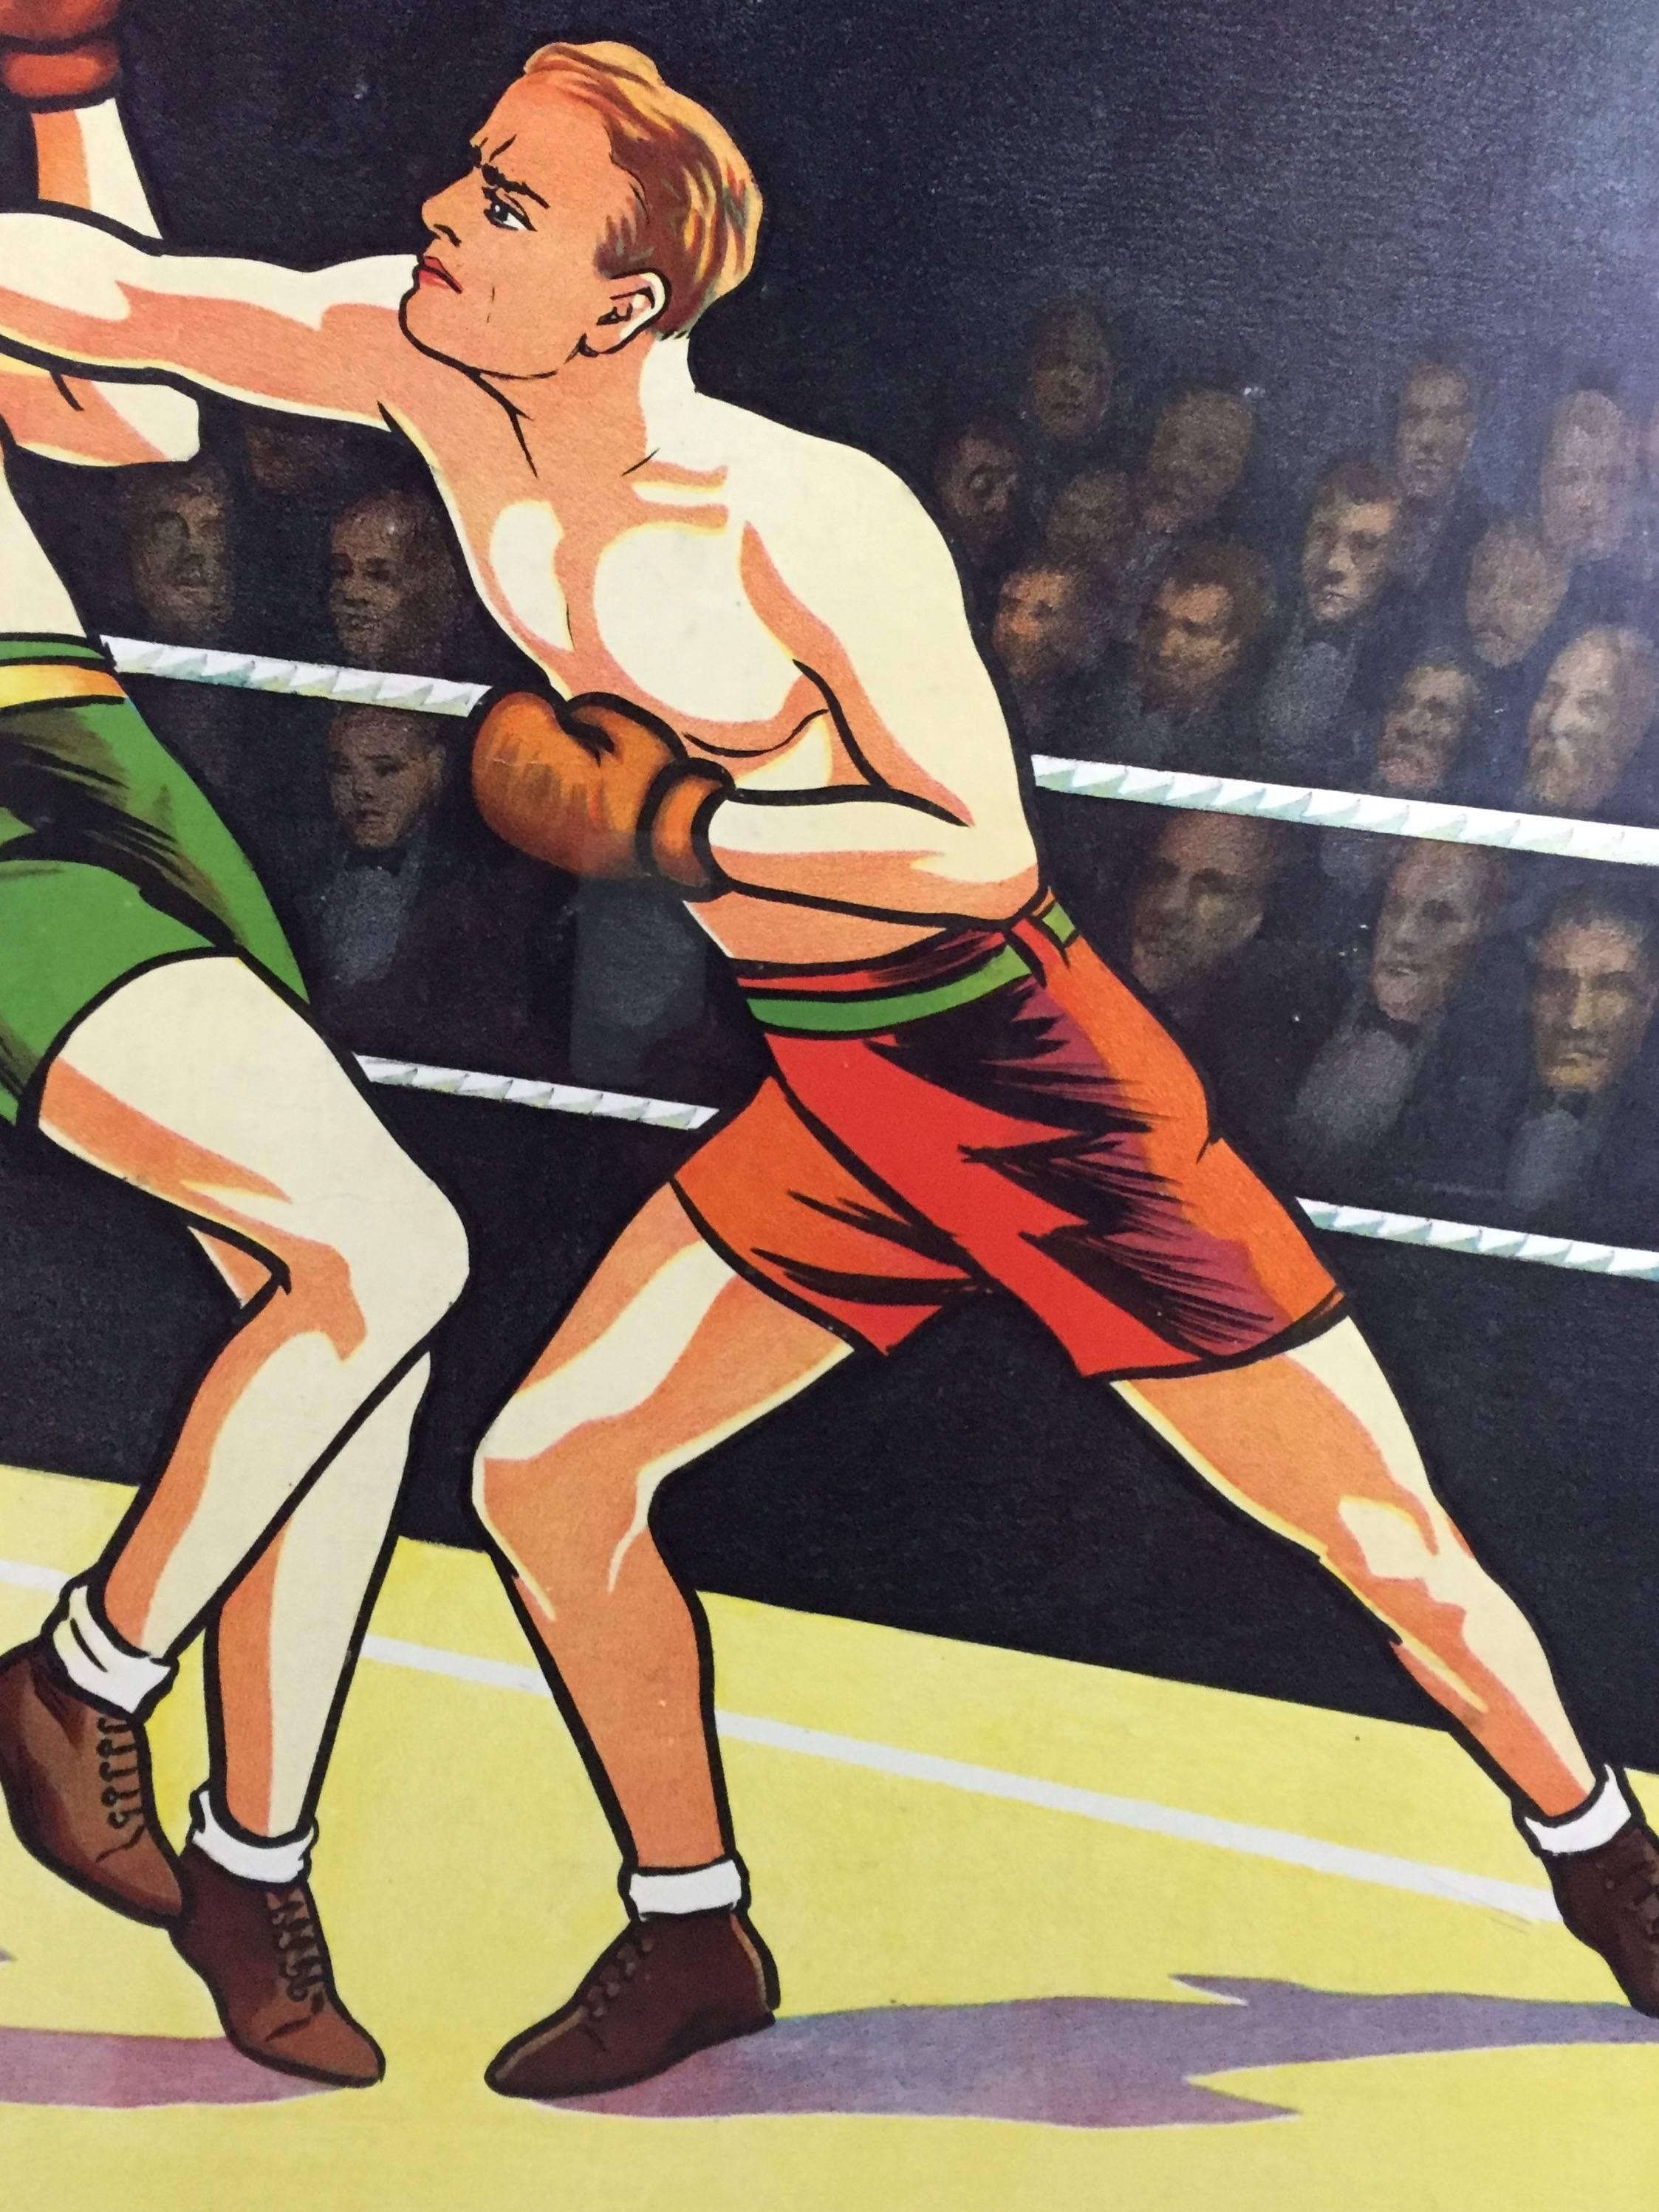 English Vintage Boxing Lithograph, Willsons' Leicester, England, 1930s